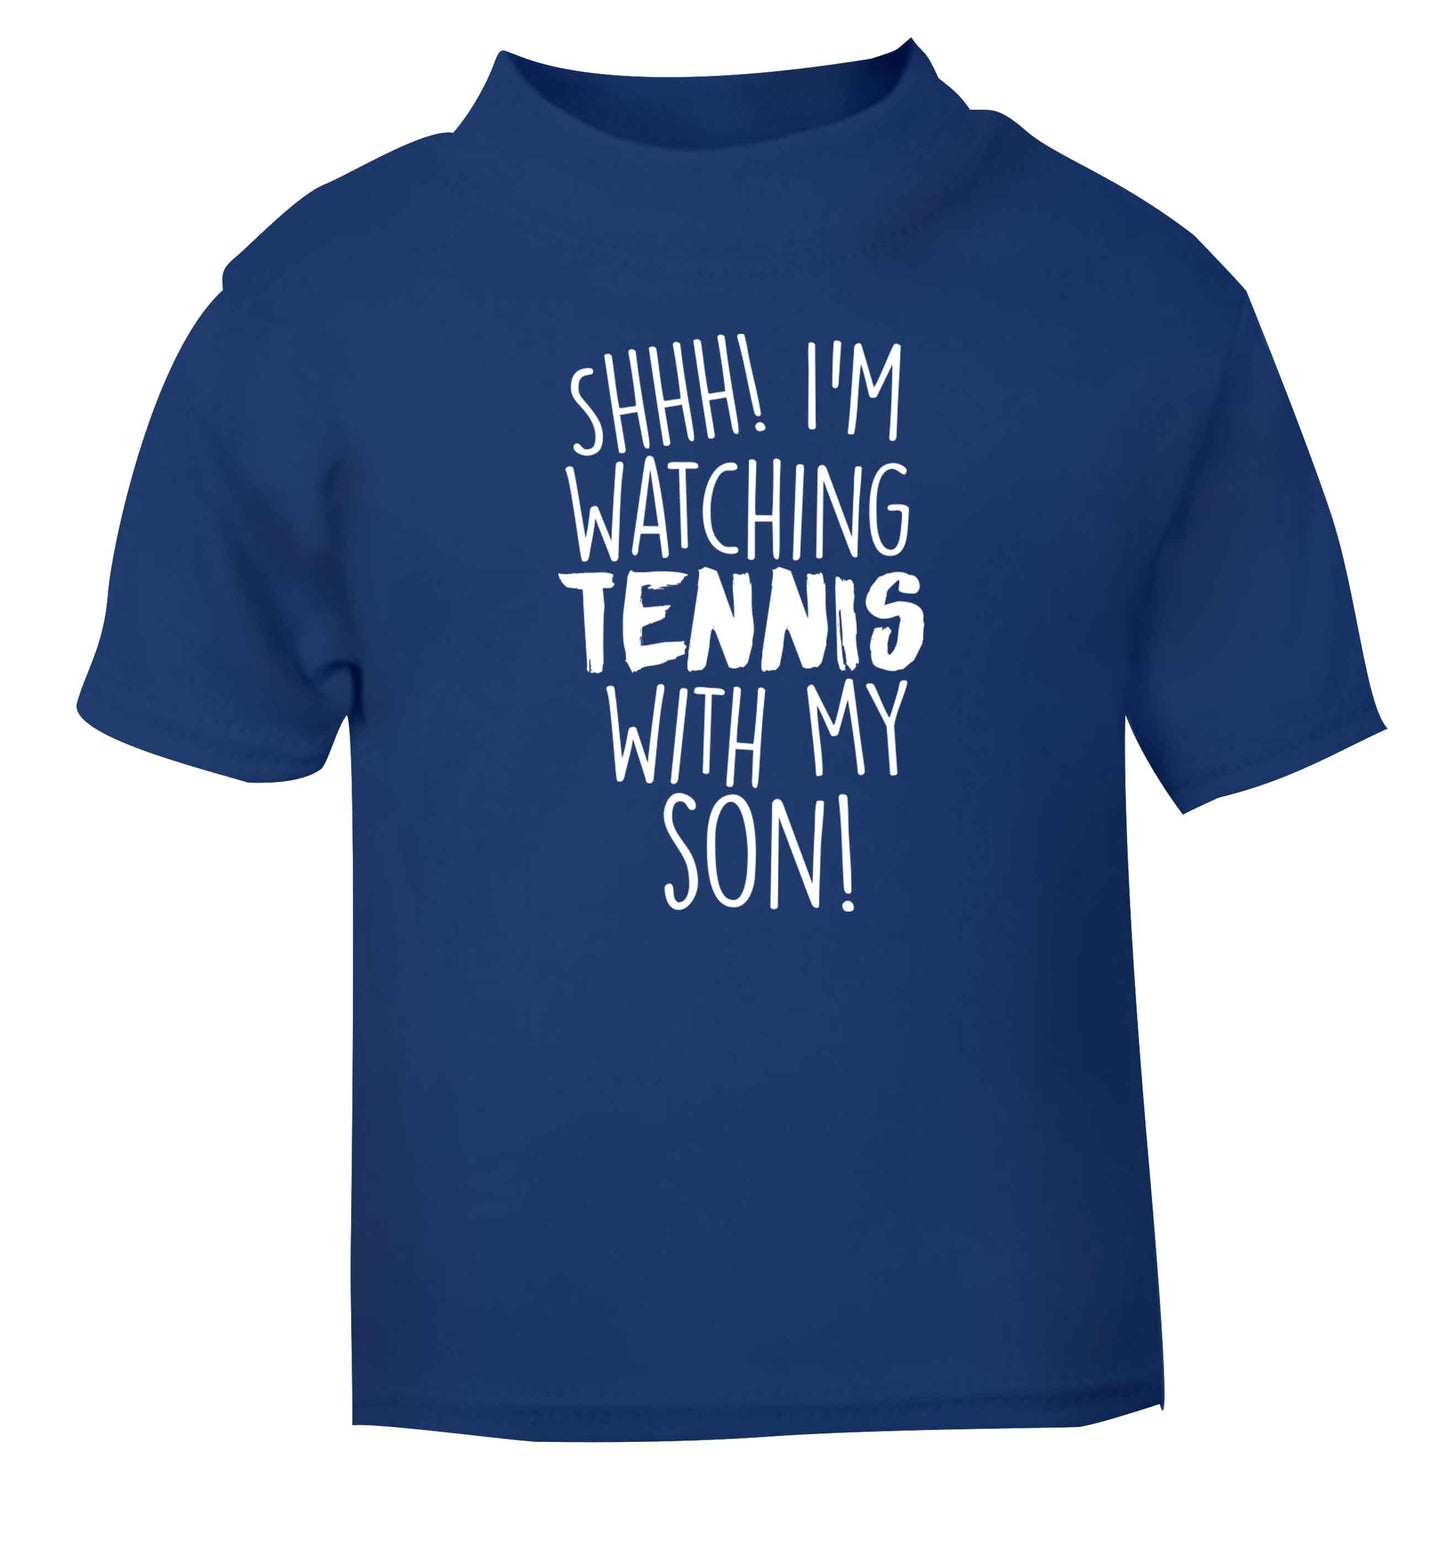 Shh! I'm watching tennis with my son! blue Baby Toddler Tshirt 2 Years